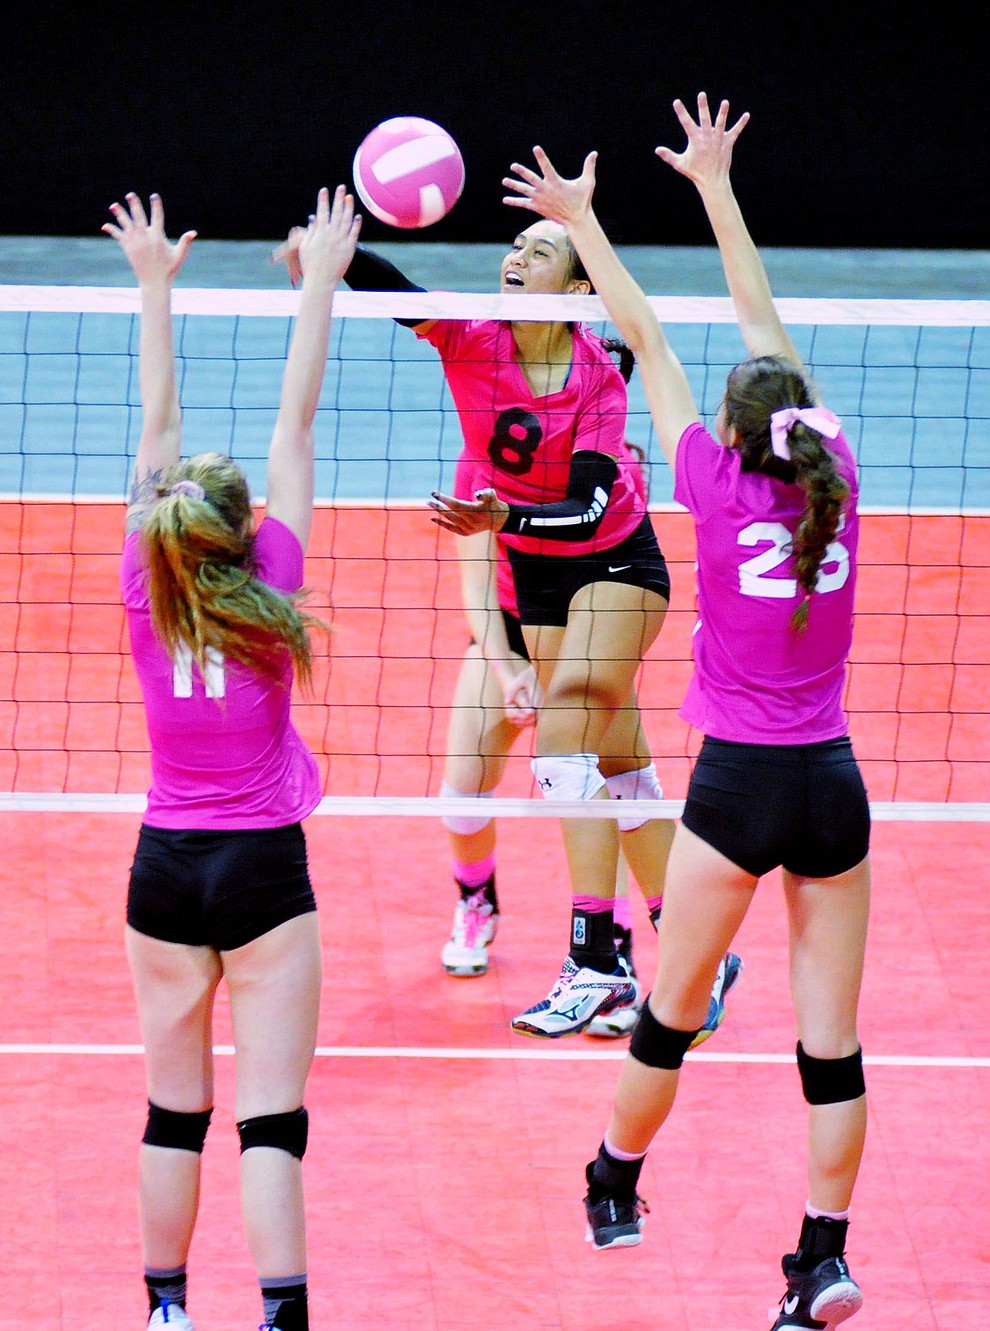 Bradshaw Mountain's Mailani Manuel gets a kill as the Bears played Prescott in the Mile High Battle Against Cancer volleyball match at the Prescott Valley Event Center Tuesday, Oct. 23, 2018.(Les Stukenberg/Courier)